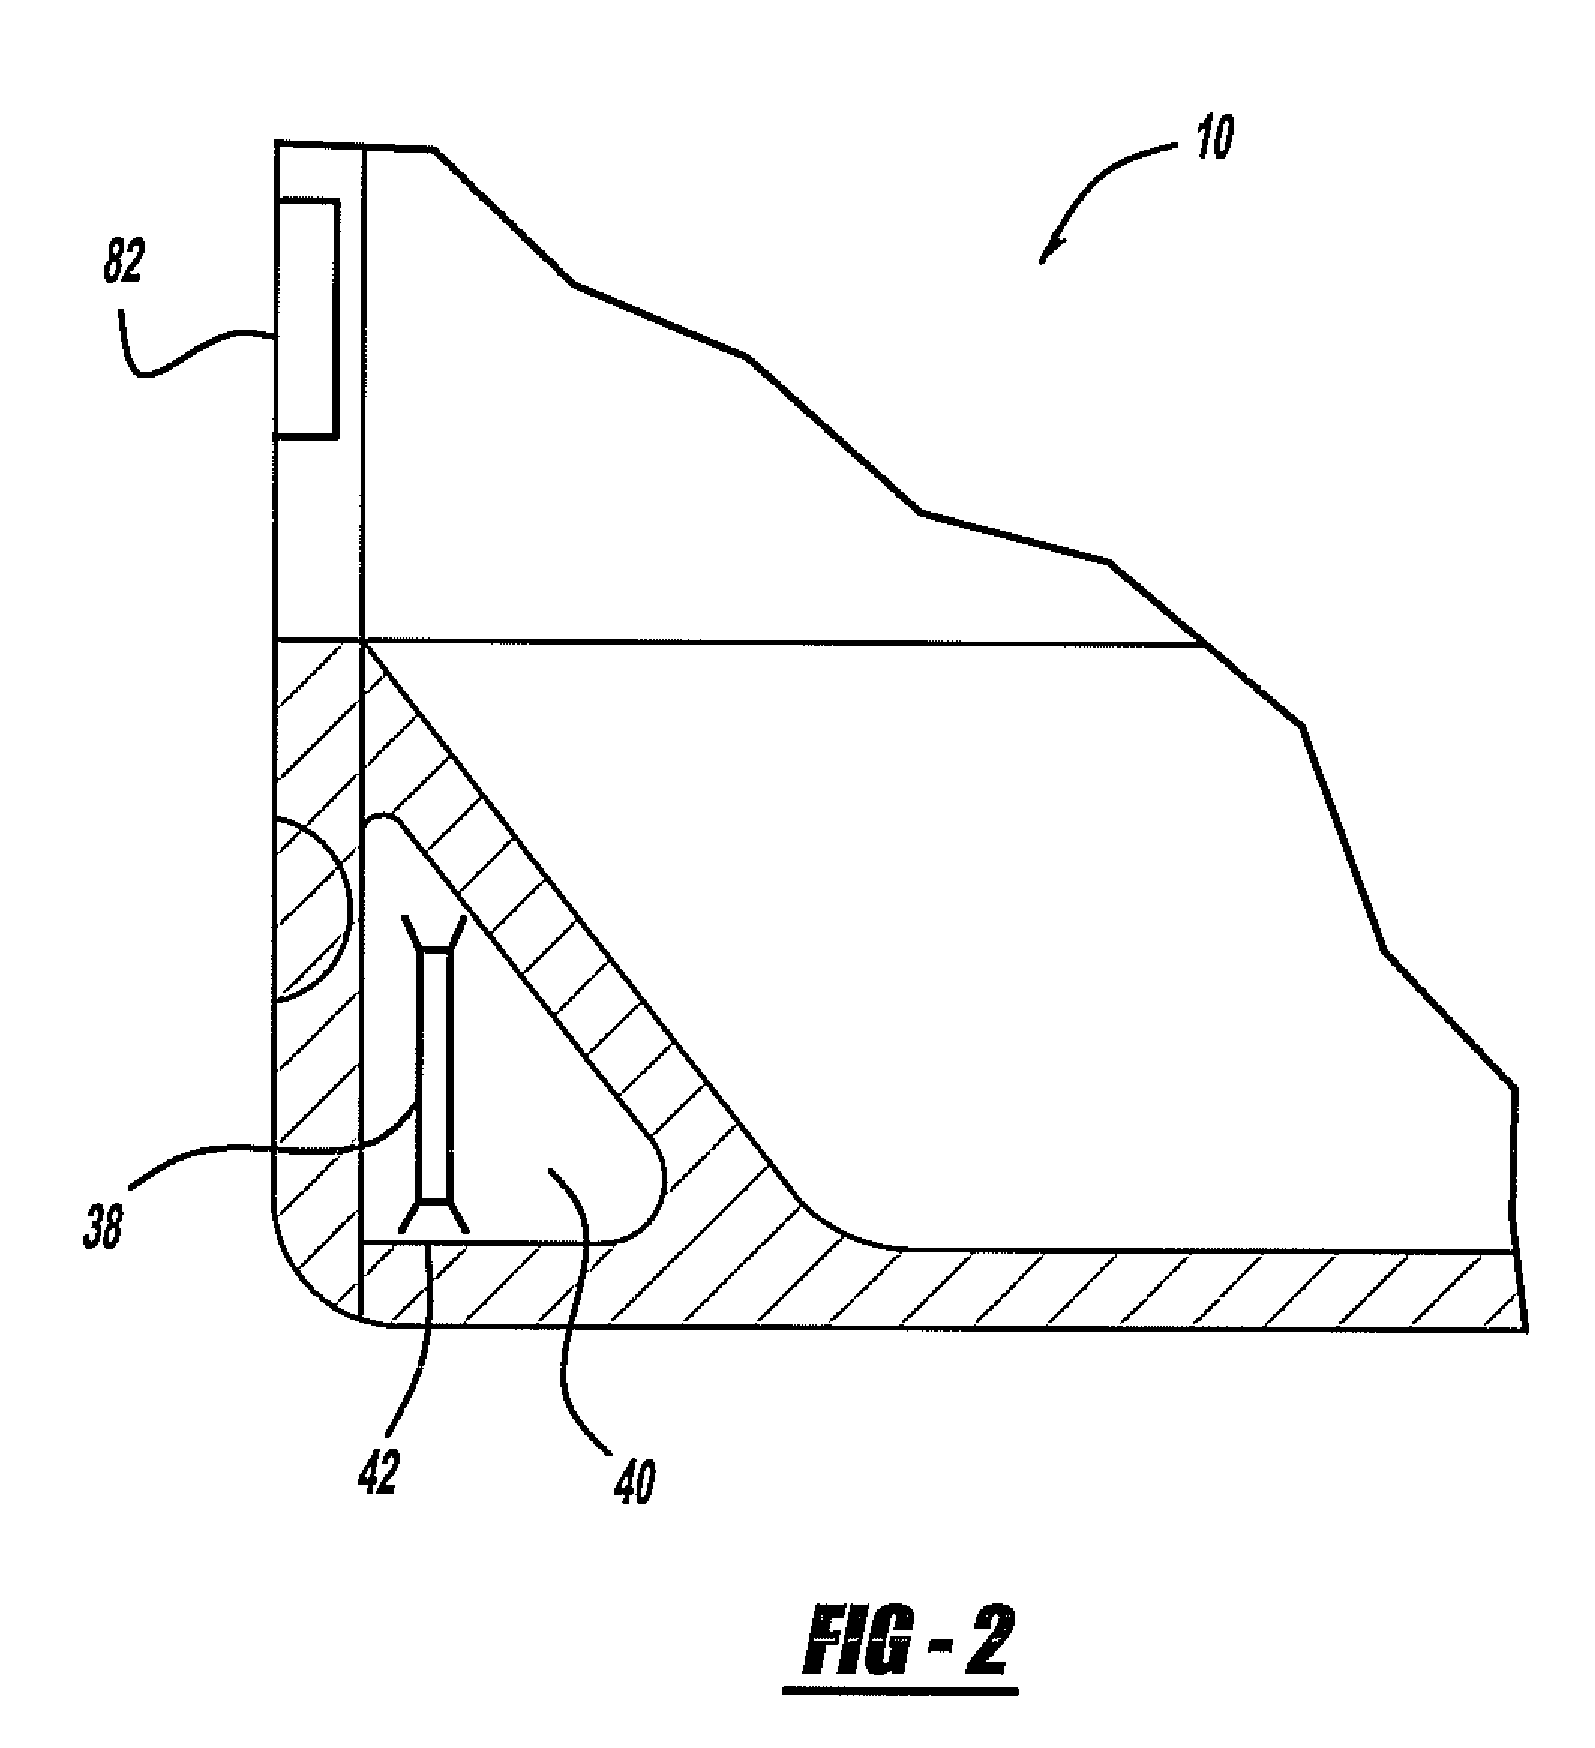 Package with integrated tracking device and method and apparatus of manufacture